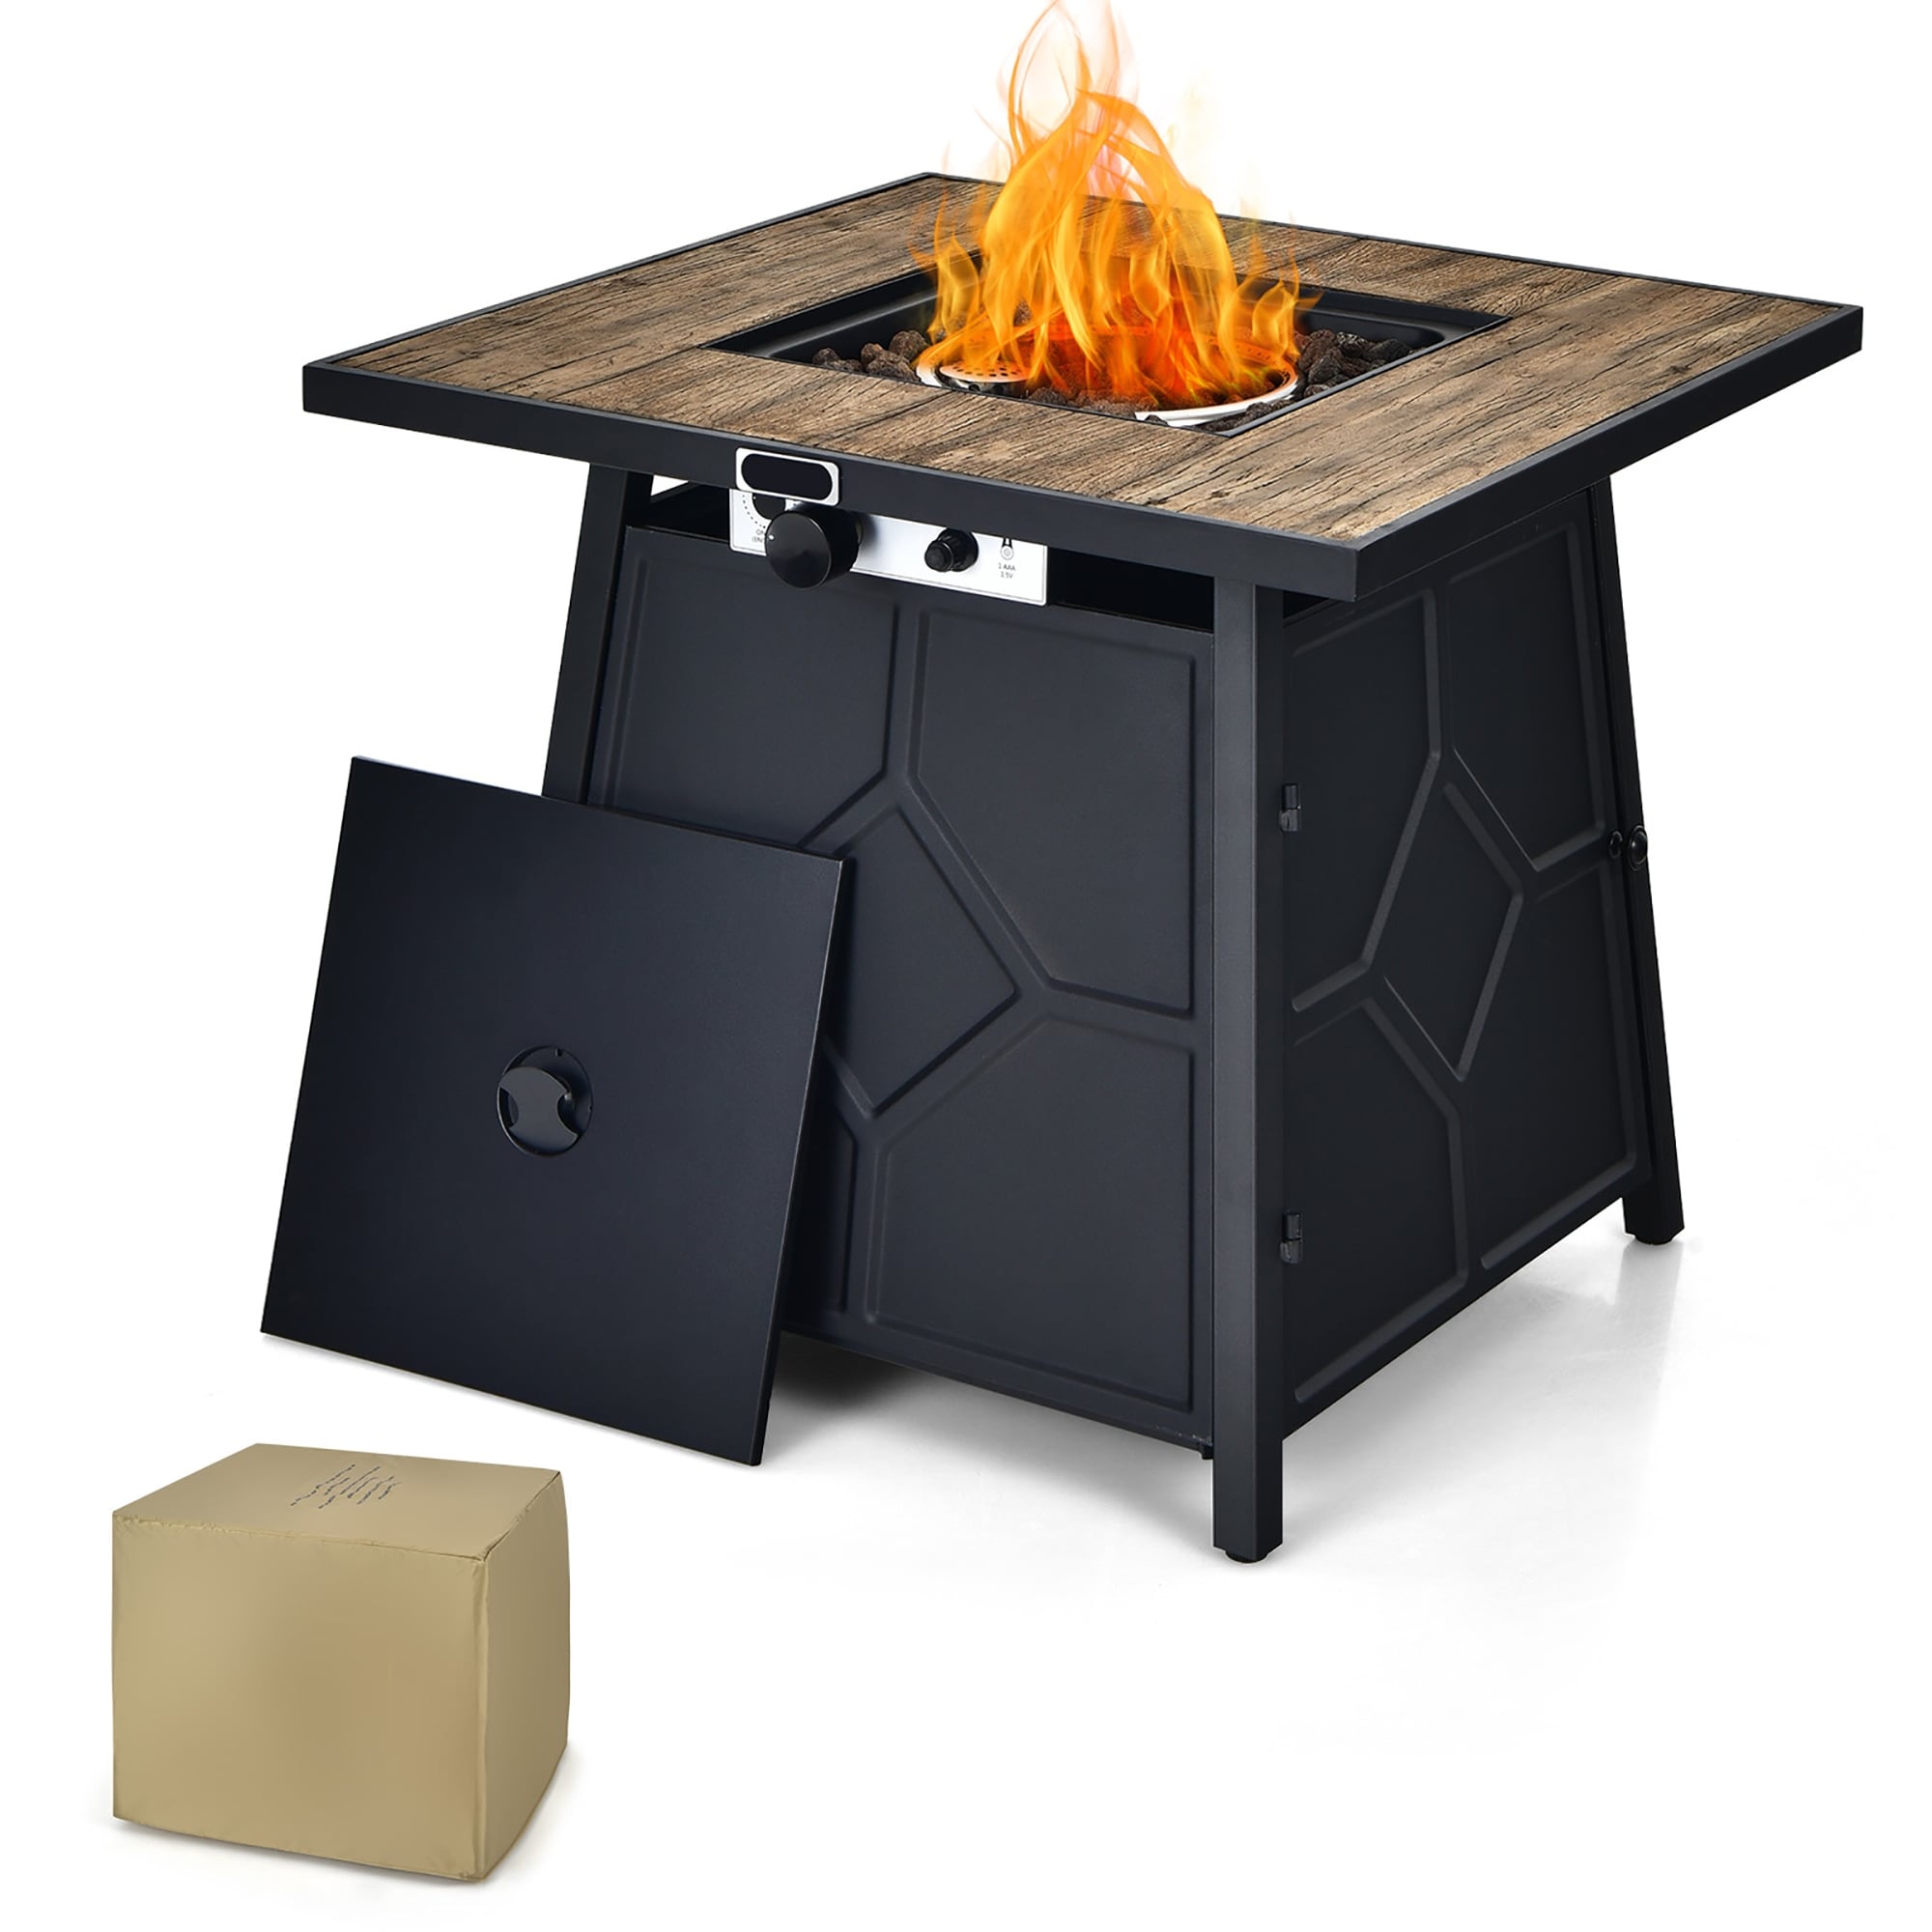 Costway 28 Inches Propane Gas Fire Pit Table 40,000 BTU Outdoor - See Details